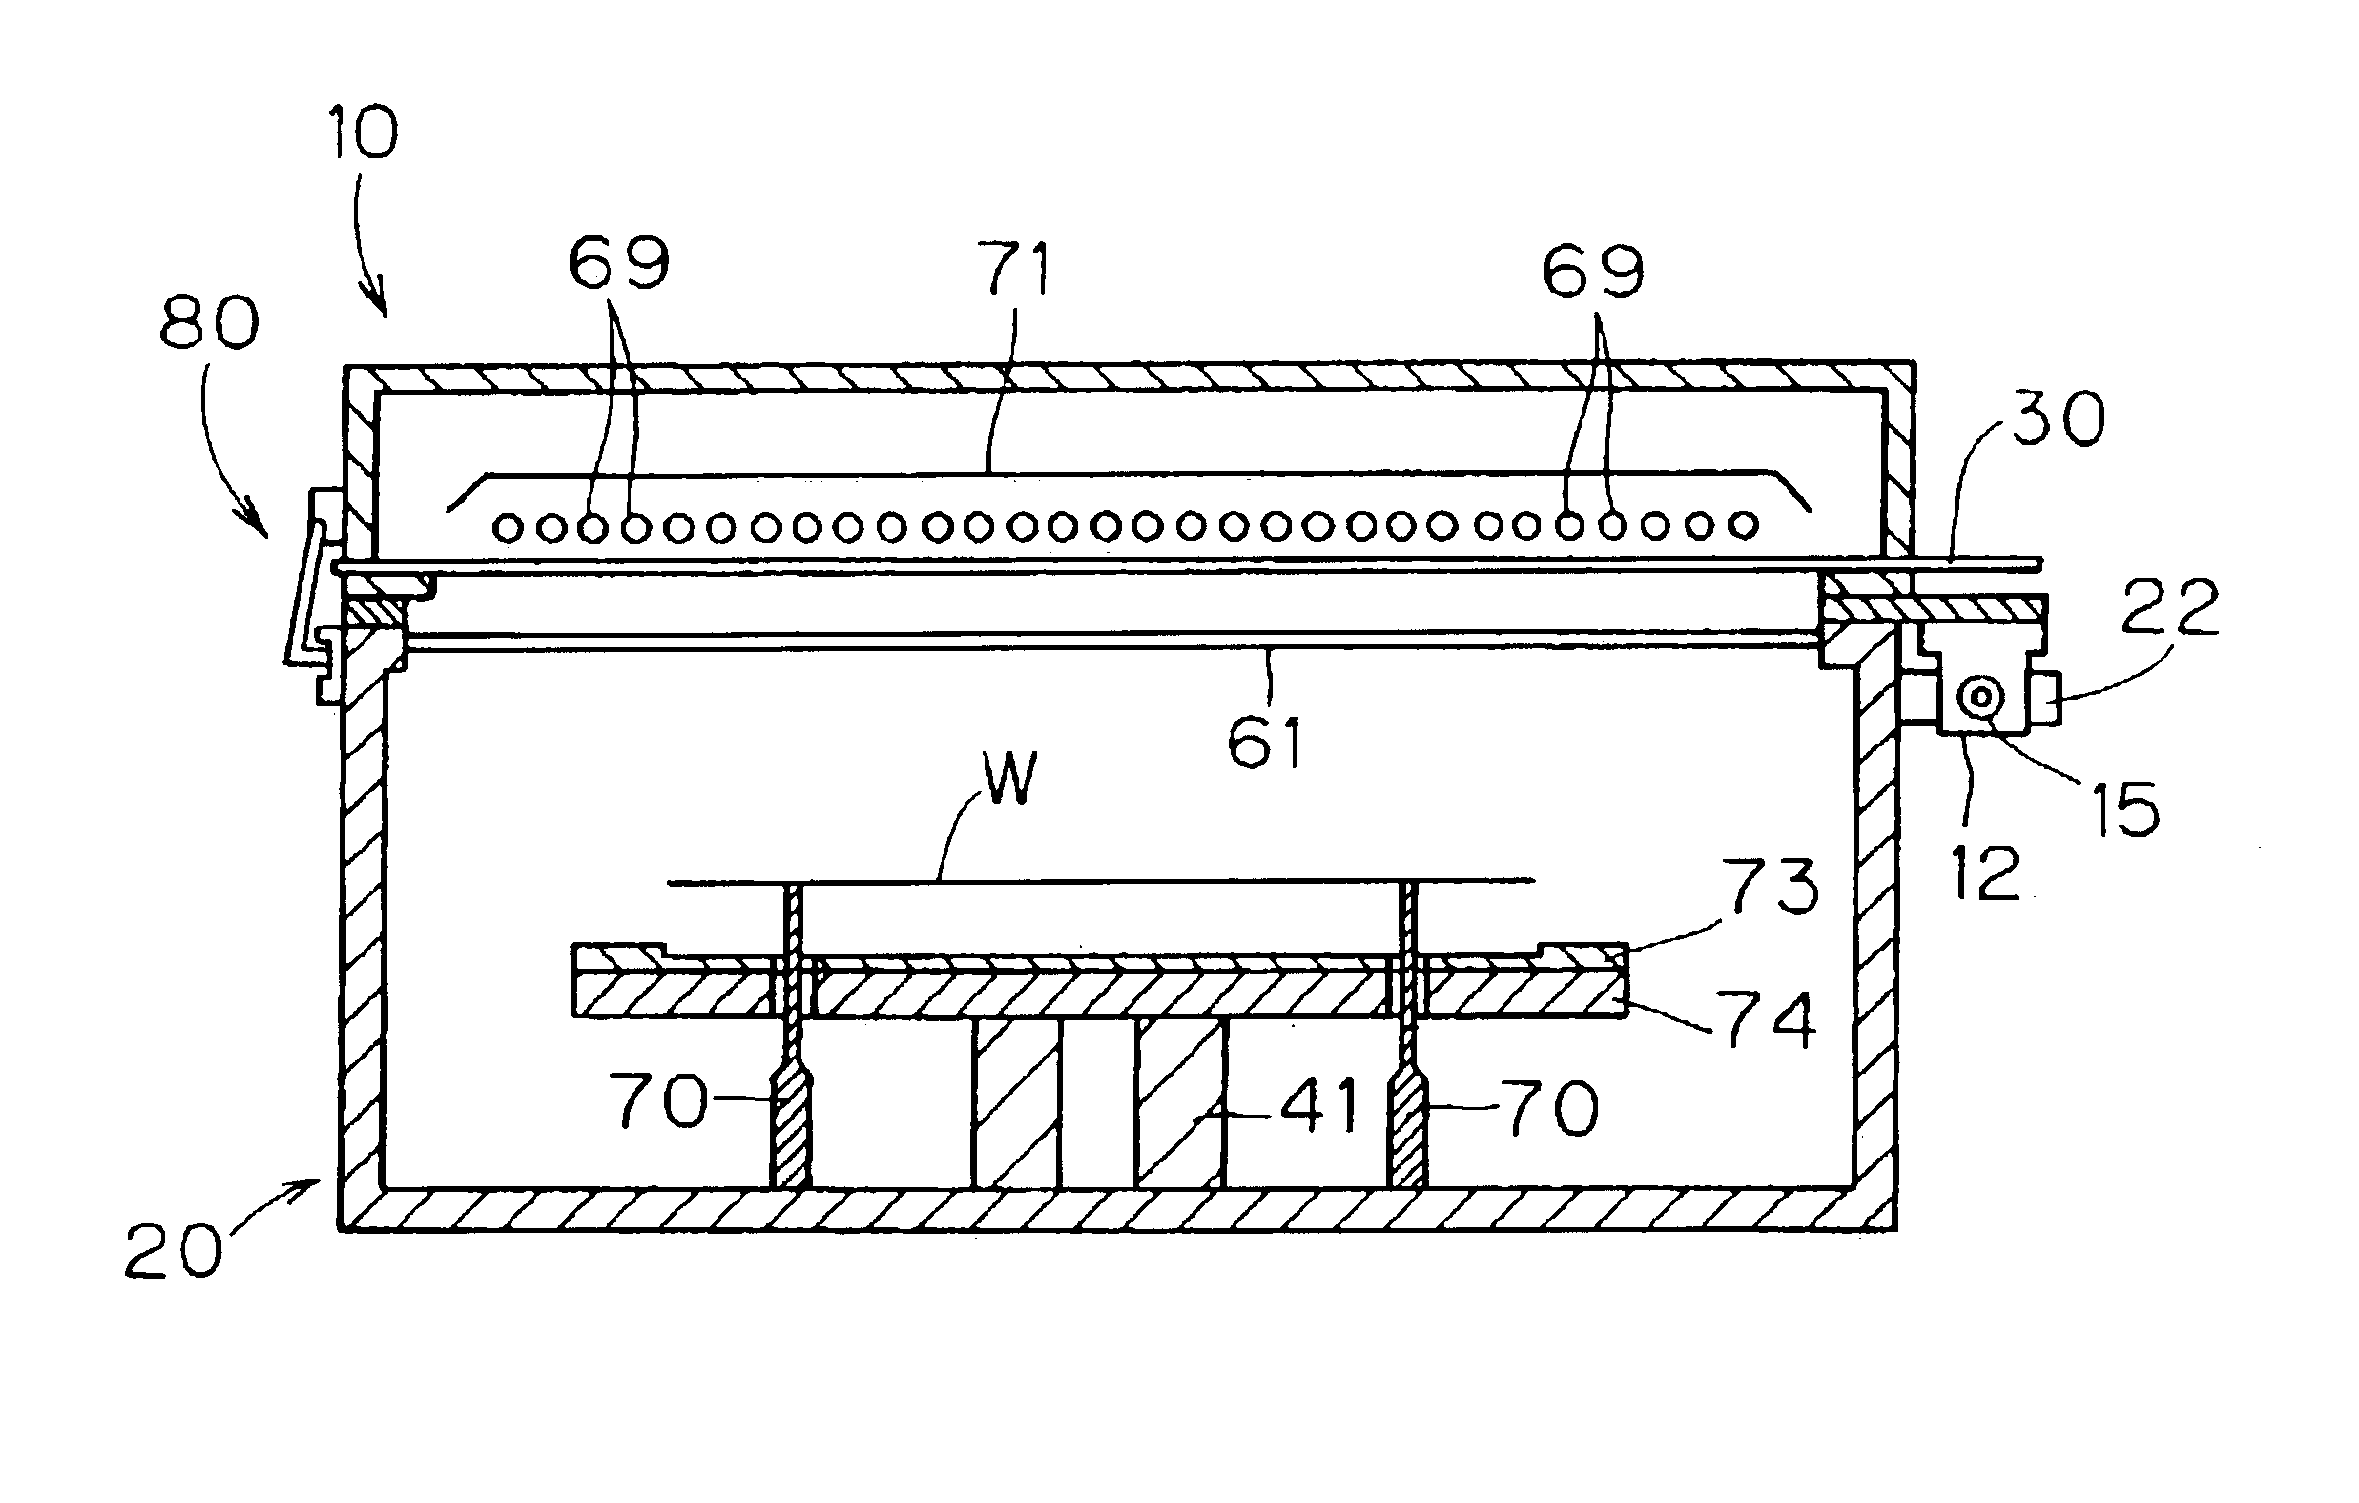 Thermal processing apparatus for substrate employing photoirradiation